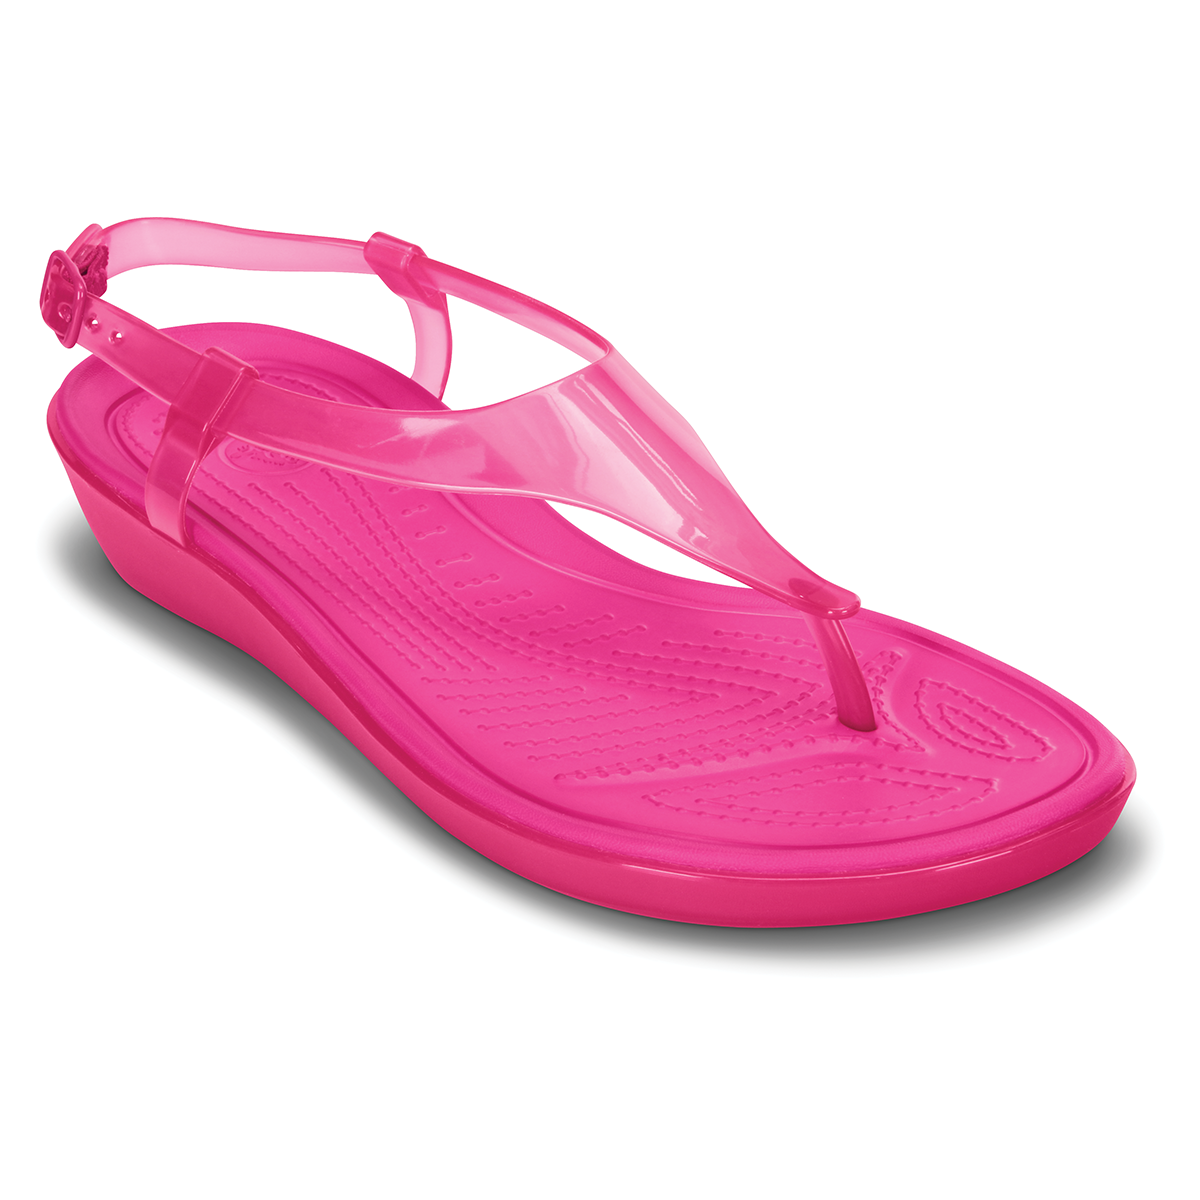  Crocs - Really Sexi T Strap Giày Sandal Candy Pink/Candy Pink Nữ 